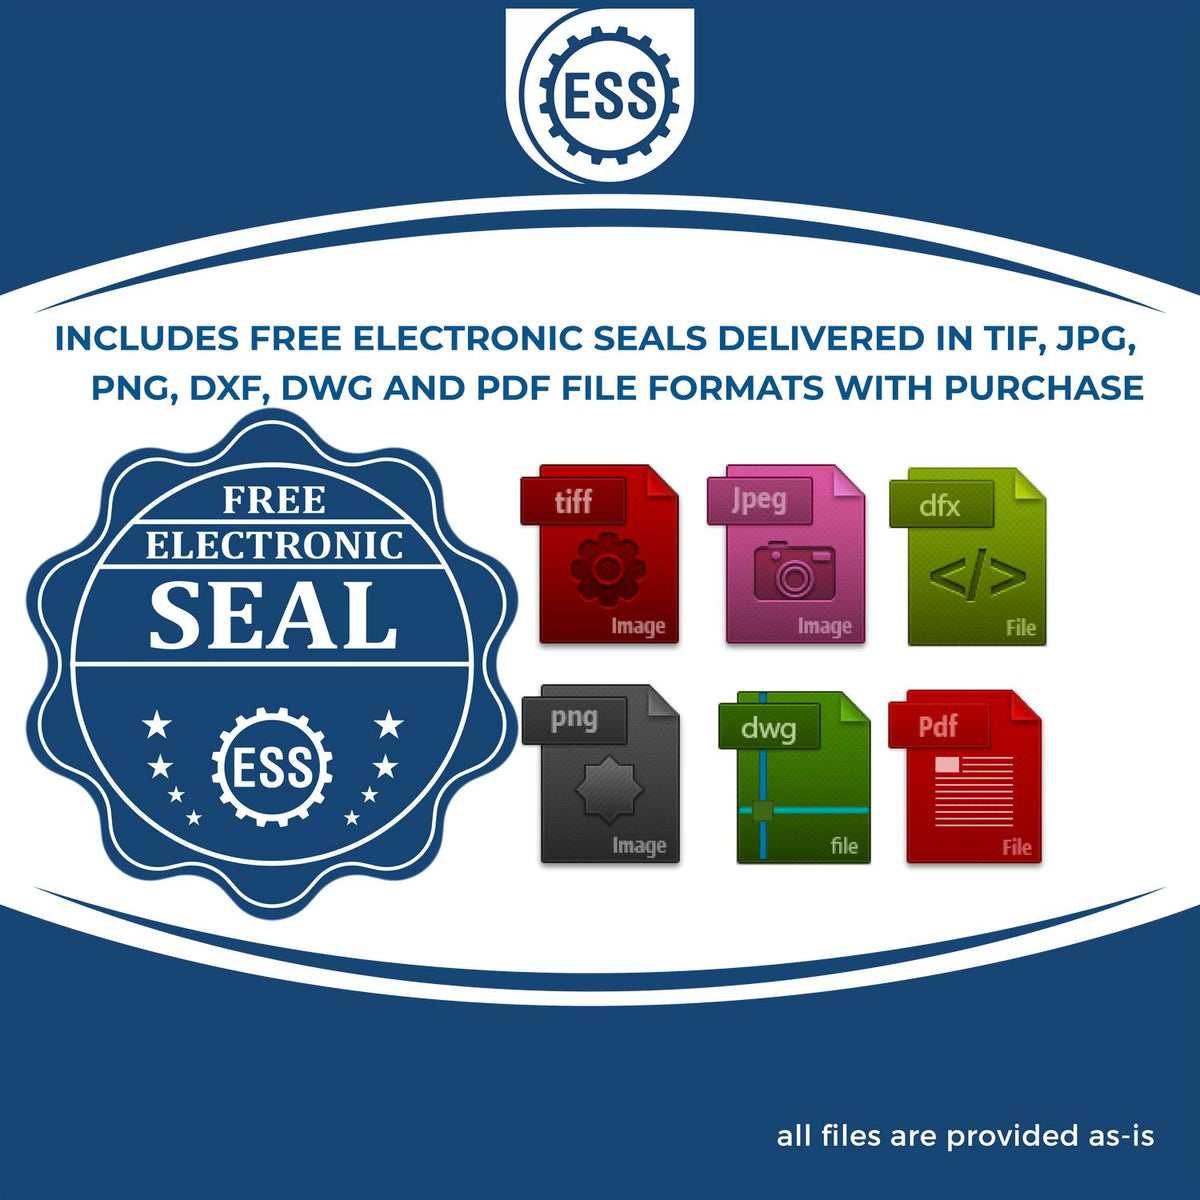 An infographic for the free electronic seal for the Premium MaxLight Pre-Inked Virginia Landscape Architectural Stamp illustrating the different file type icons such as DXF, DWG, TIF, JPG and PNG.